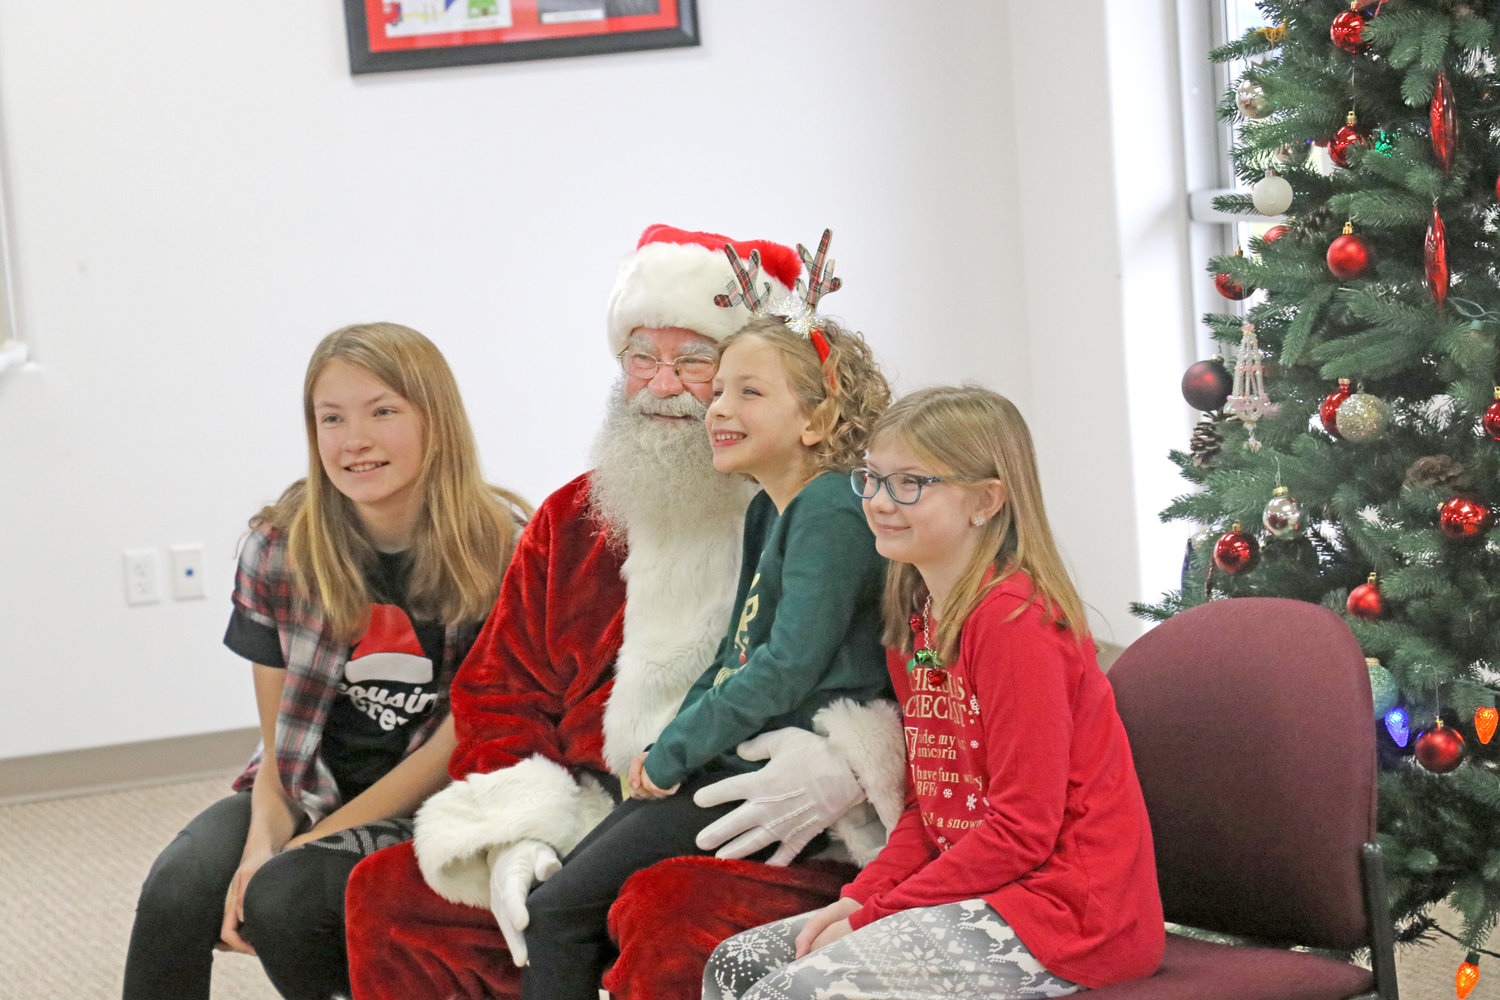 A trio of young ladies dressed festively for their photo with Mr. Claus.